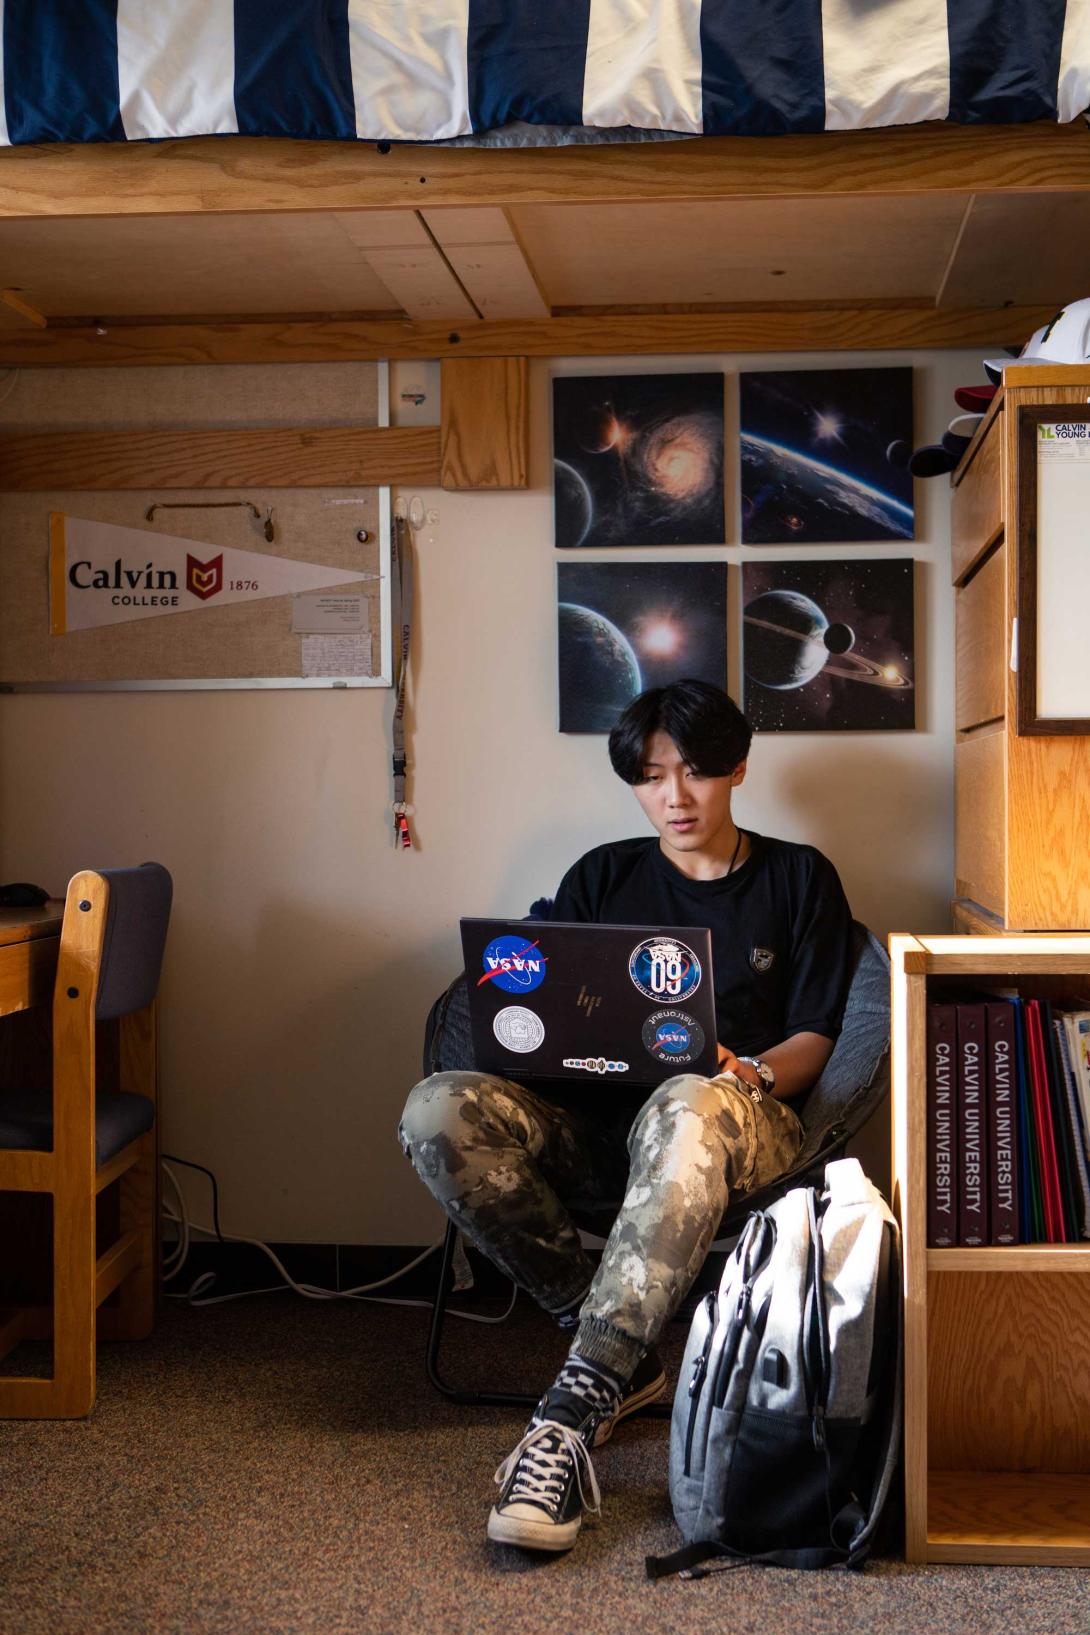 A student works on his computer at his dorm room desk, with pictures of outer space on the wall, a calvin university penant on the bulletin board, and his backpack on the ground.